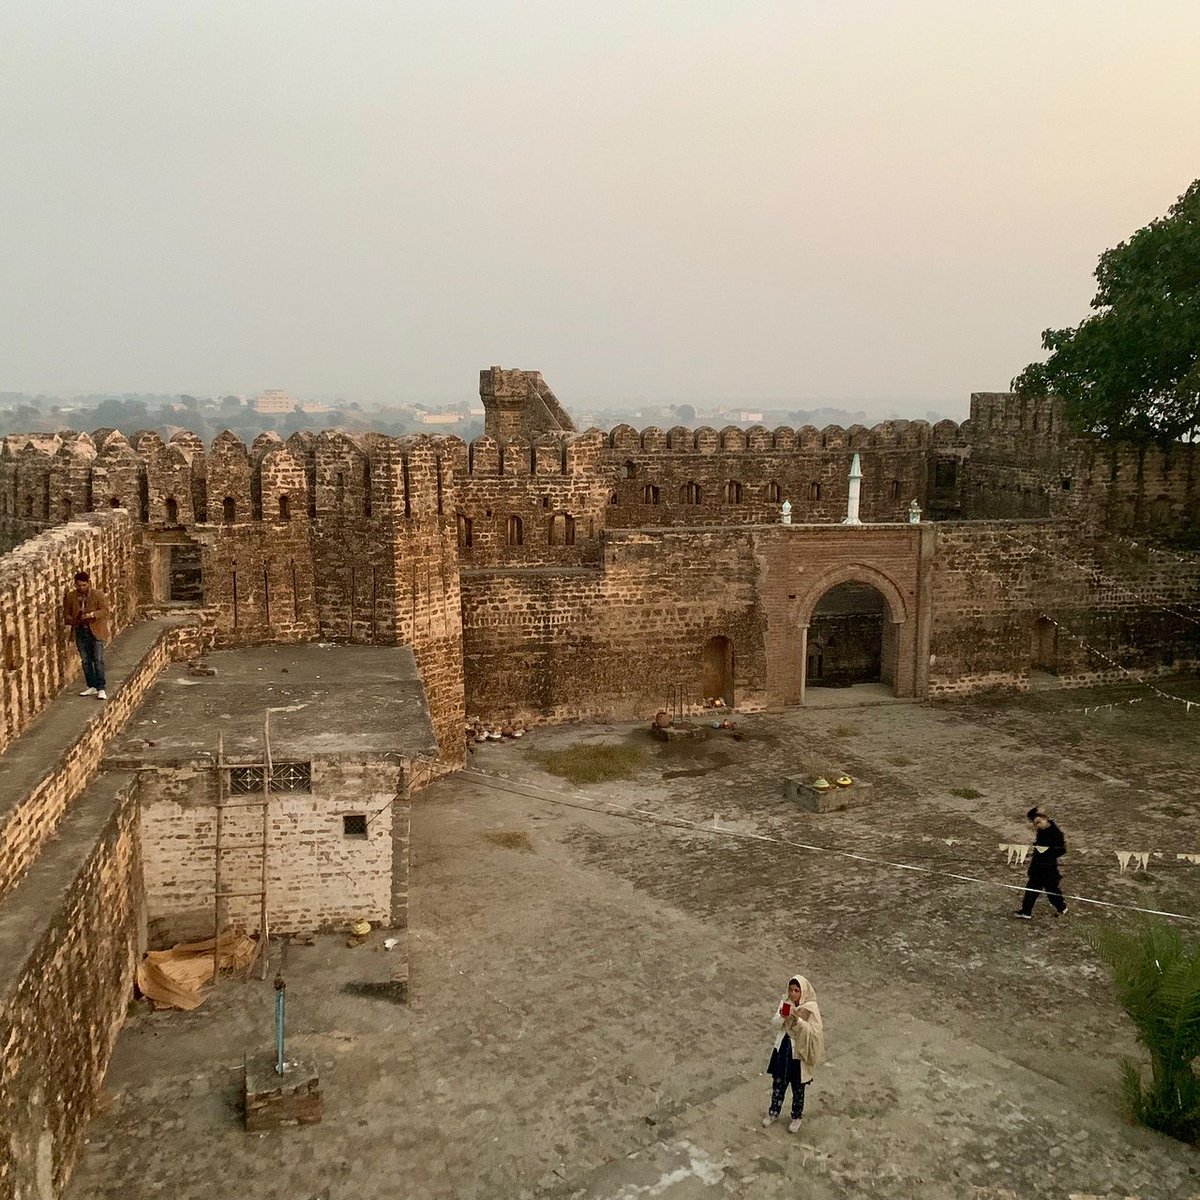 Sangni Fort, RawalpindiThis Sikh era fort was built to manage taxation in the region. After the British took over, it fell into disuse and today houses the shrine of a local saint. This is one of the reasons it is still well-maintained.